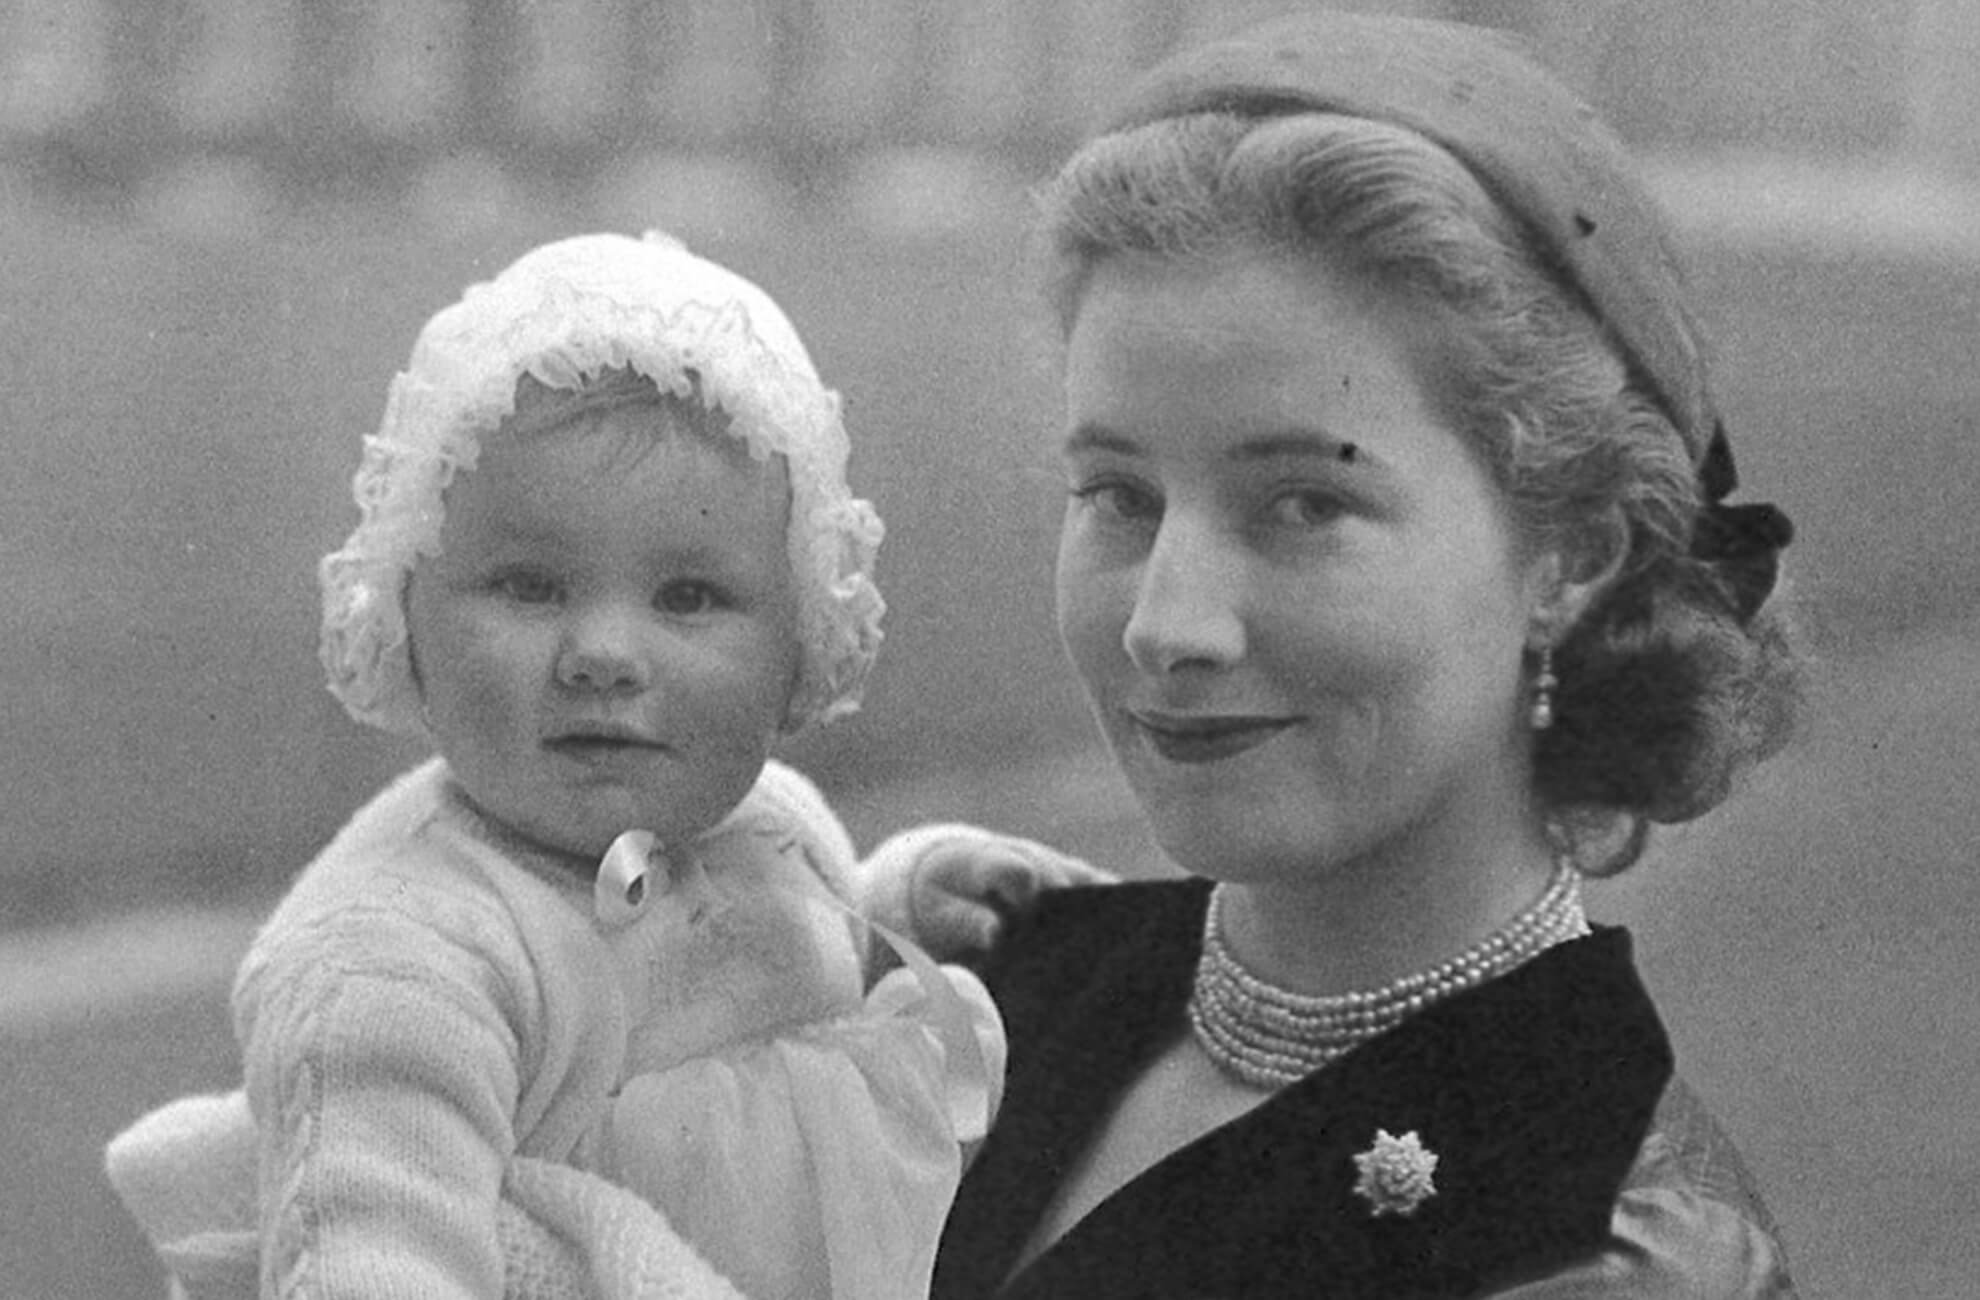 A black and white photograph of Lady Lindsay and her daughter